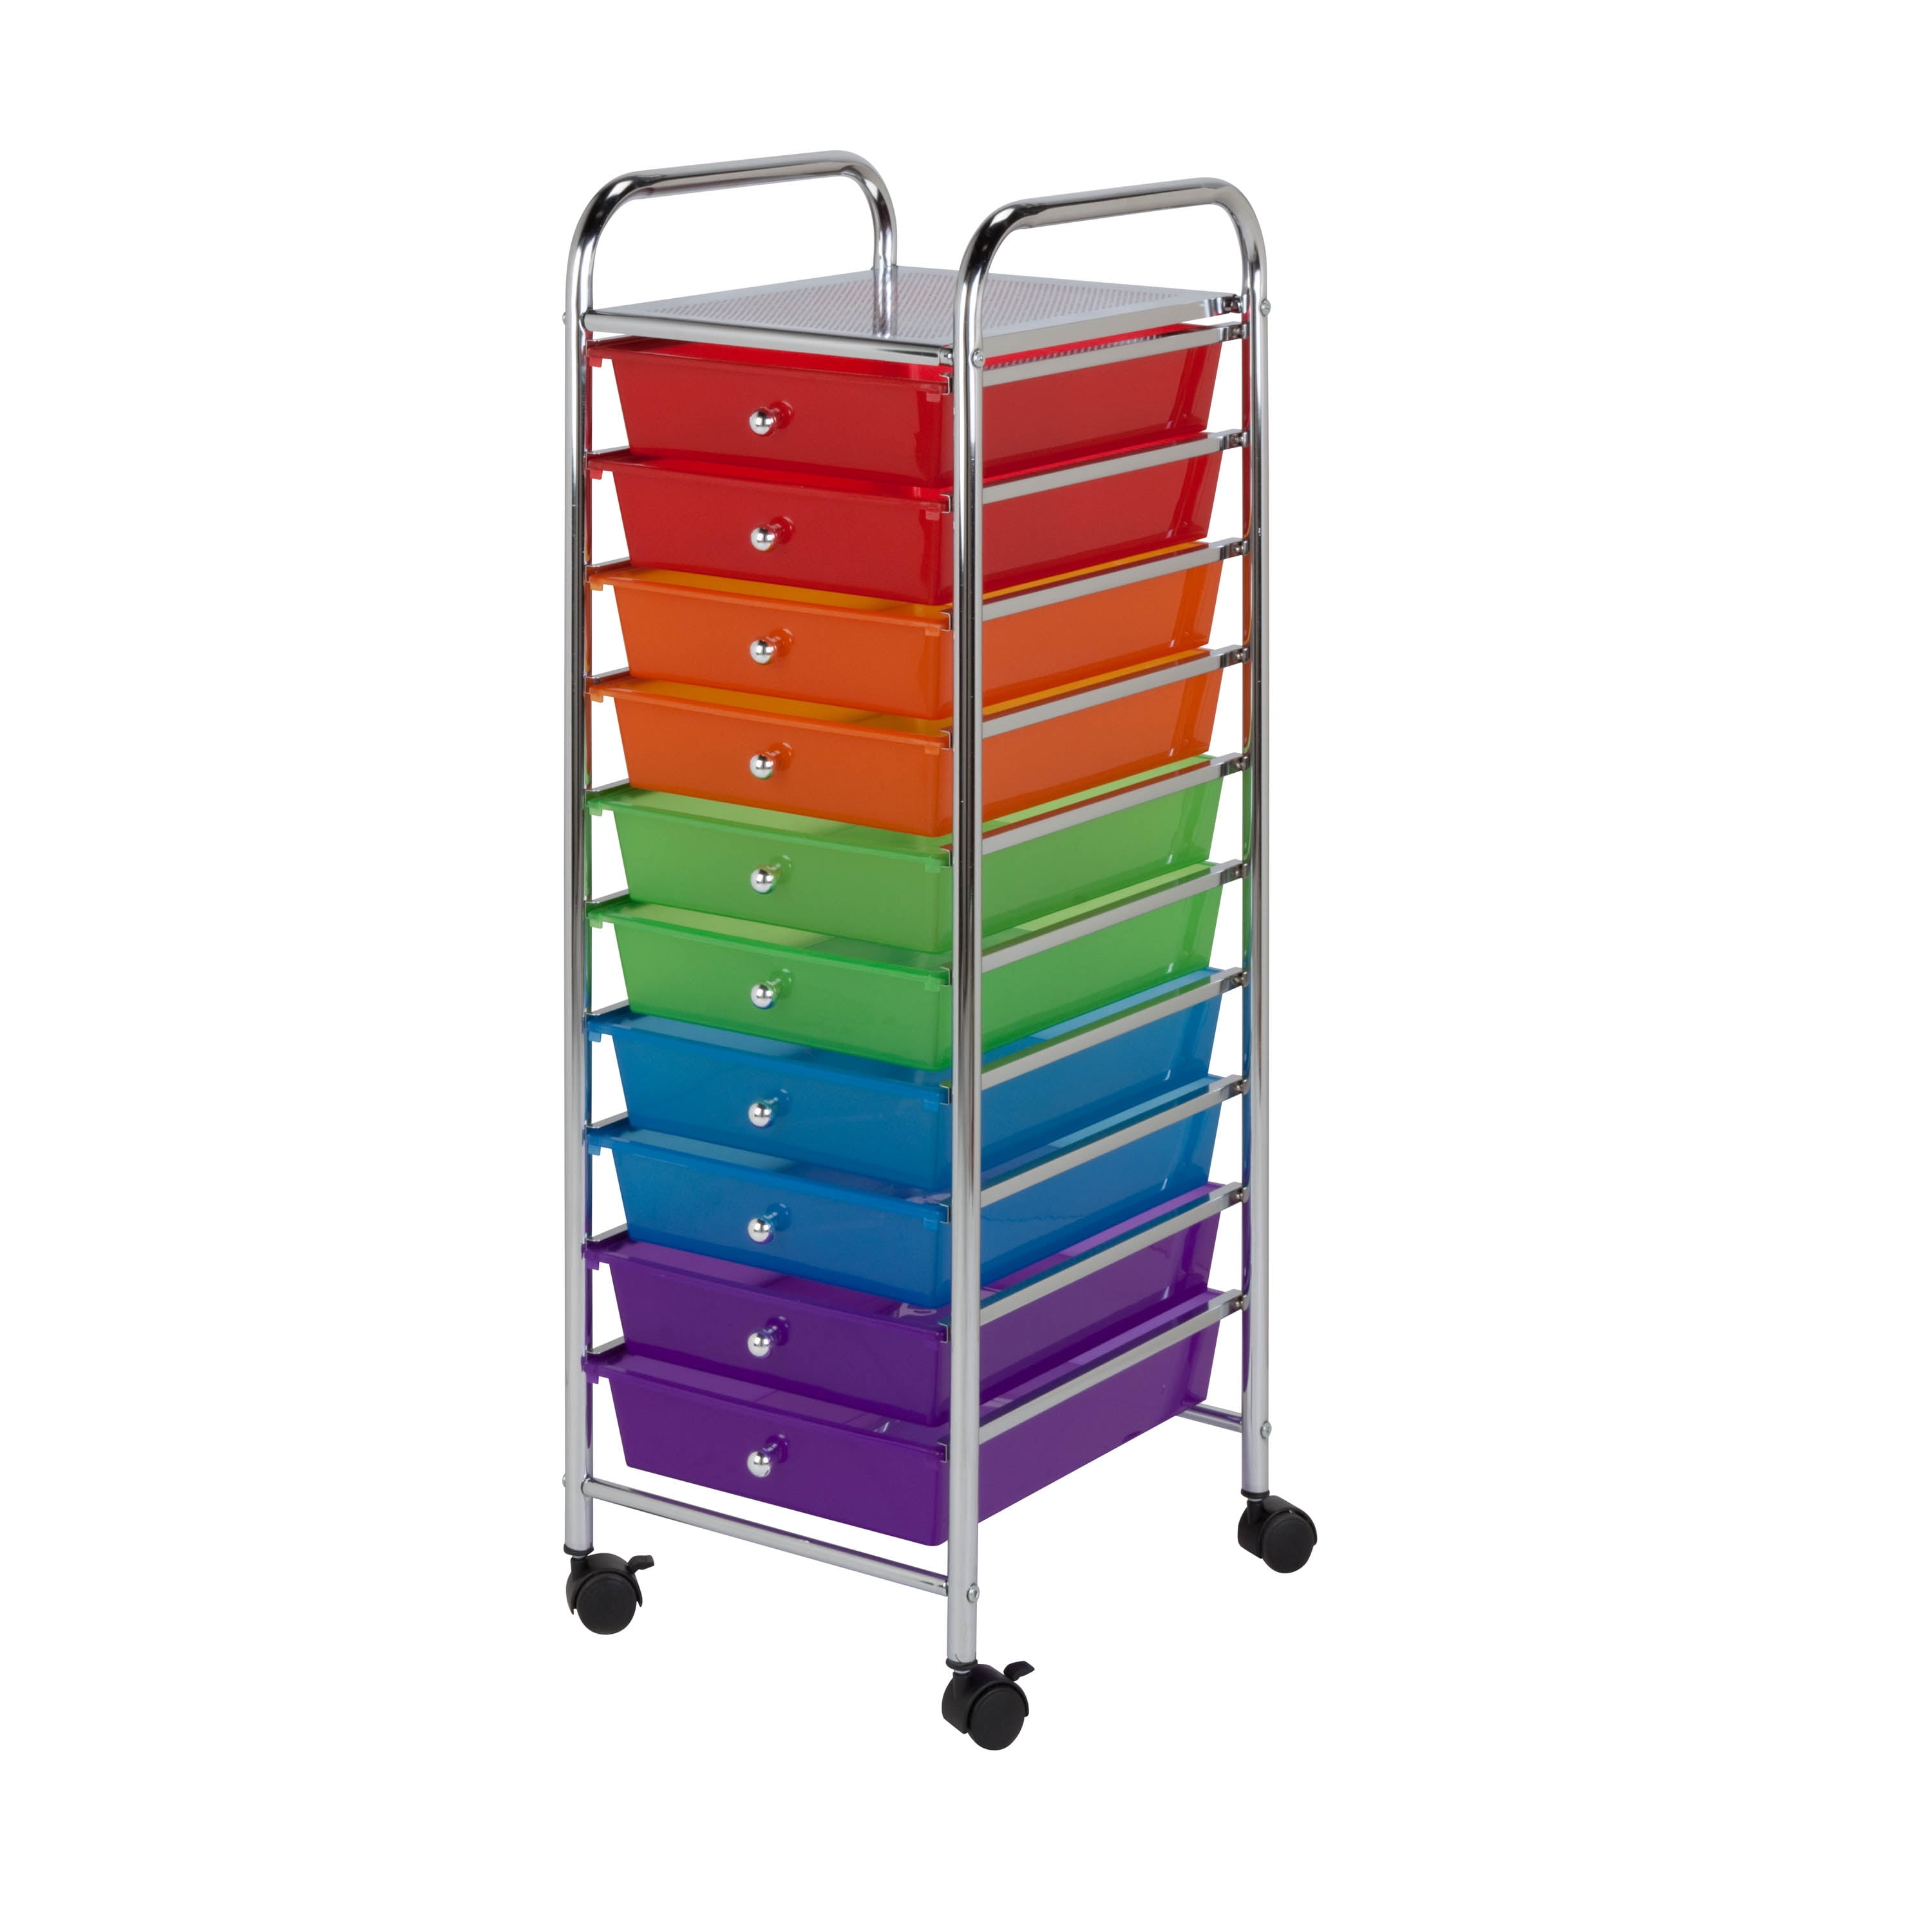 Details about   Honey Can Do Storage Cart with 10 Drawers and Rollers Multicolor 